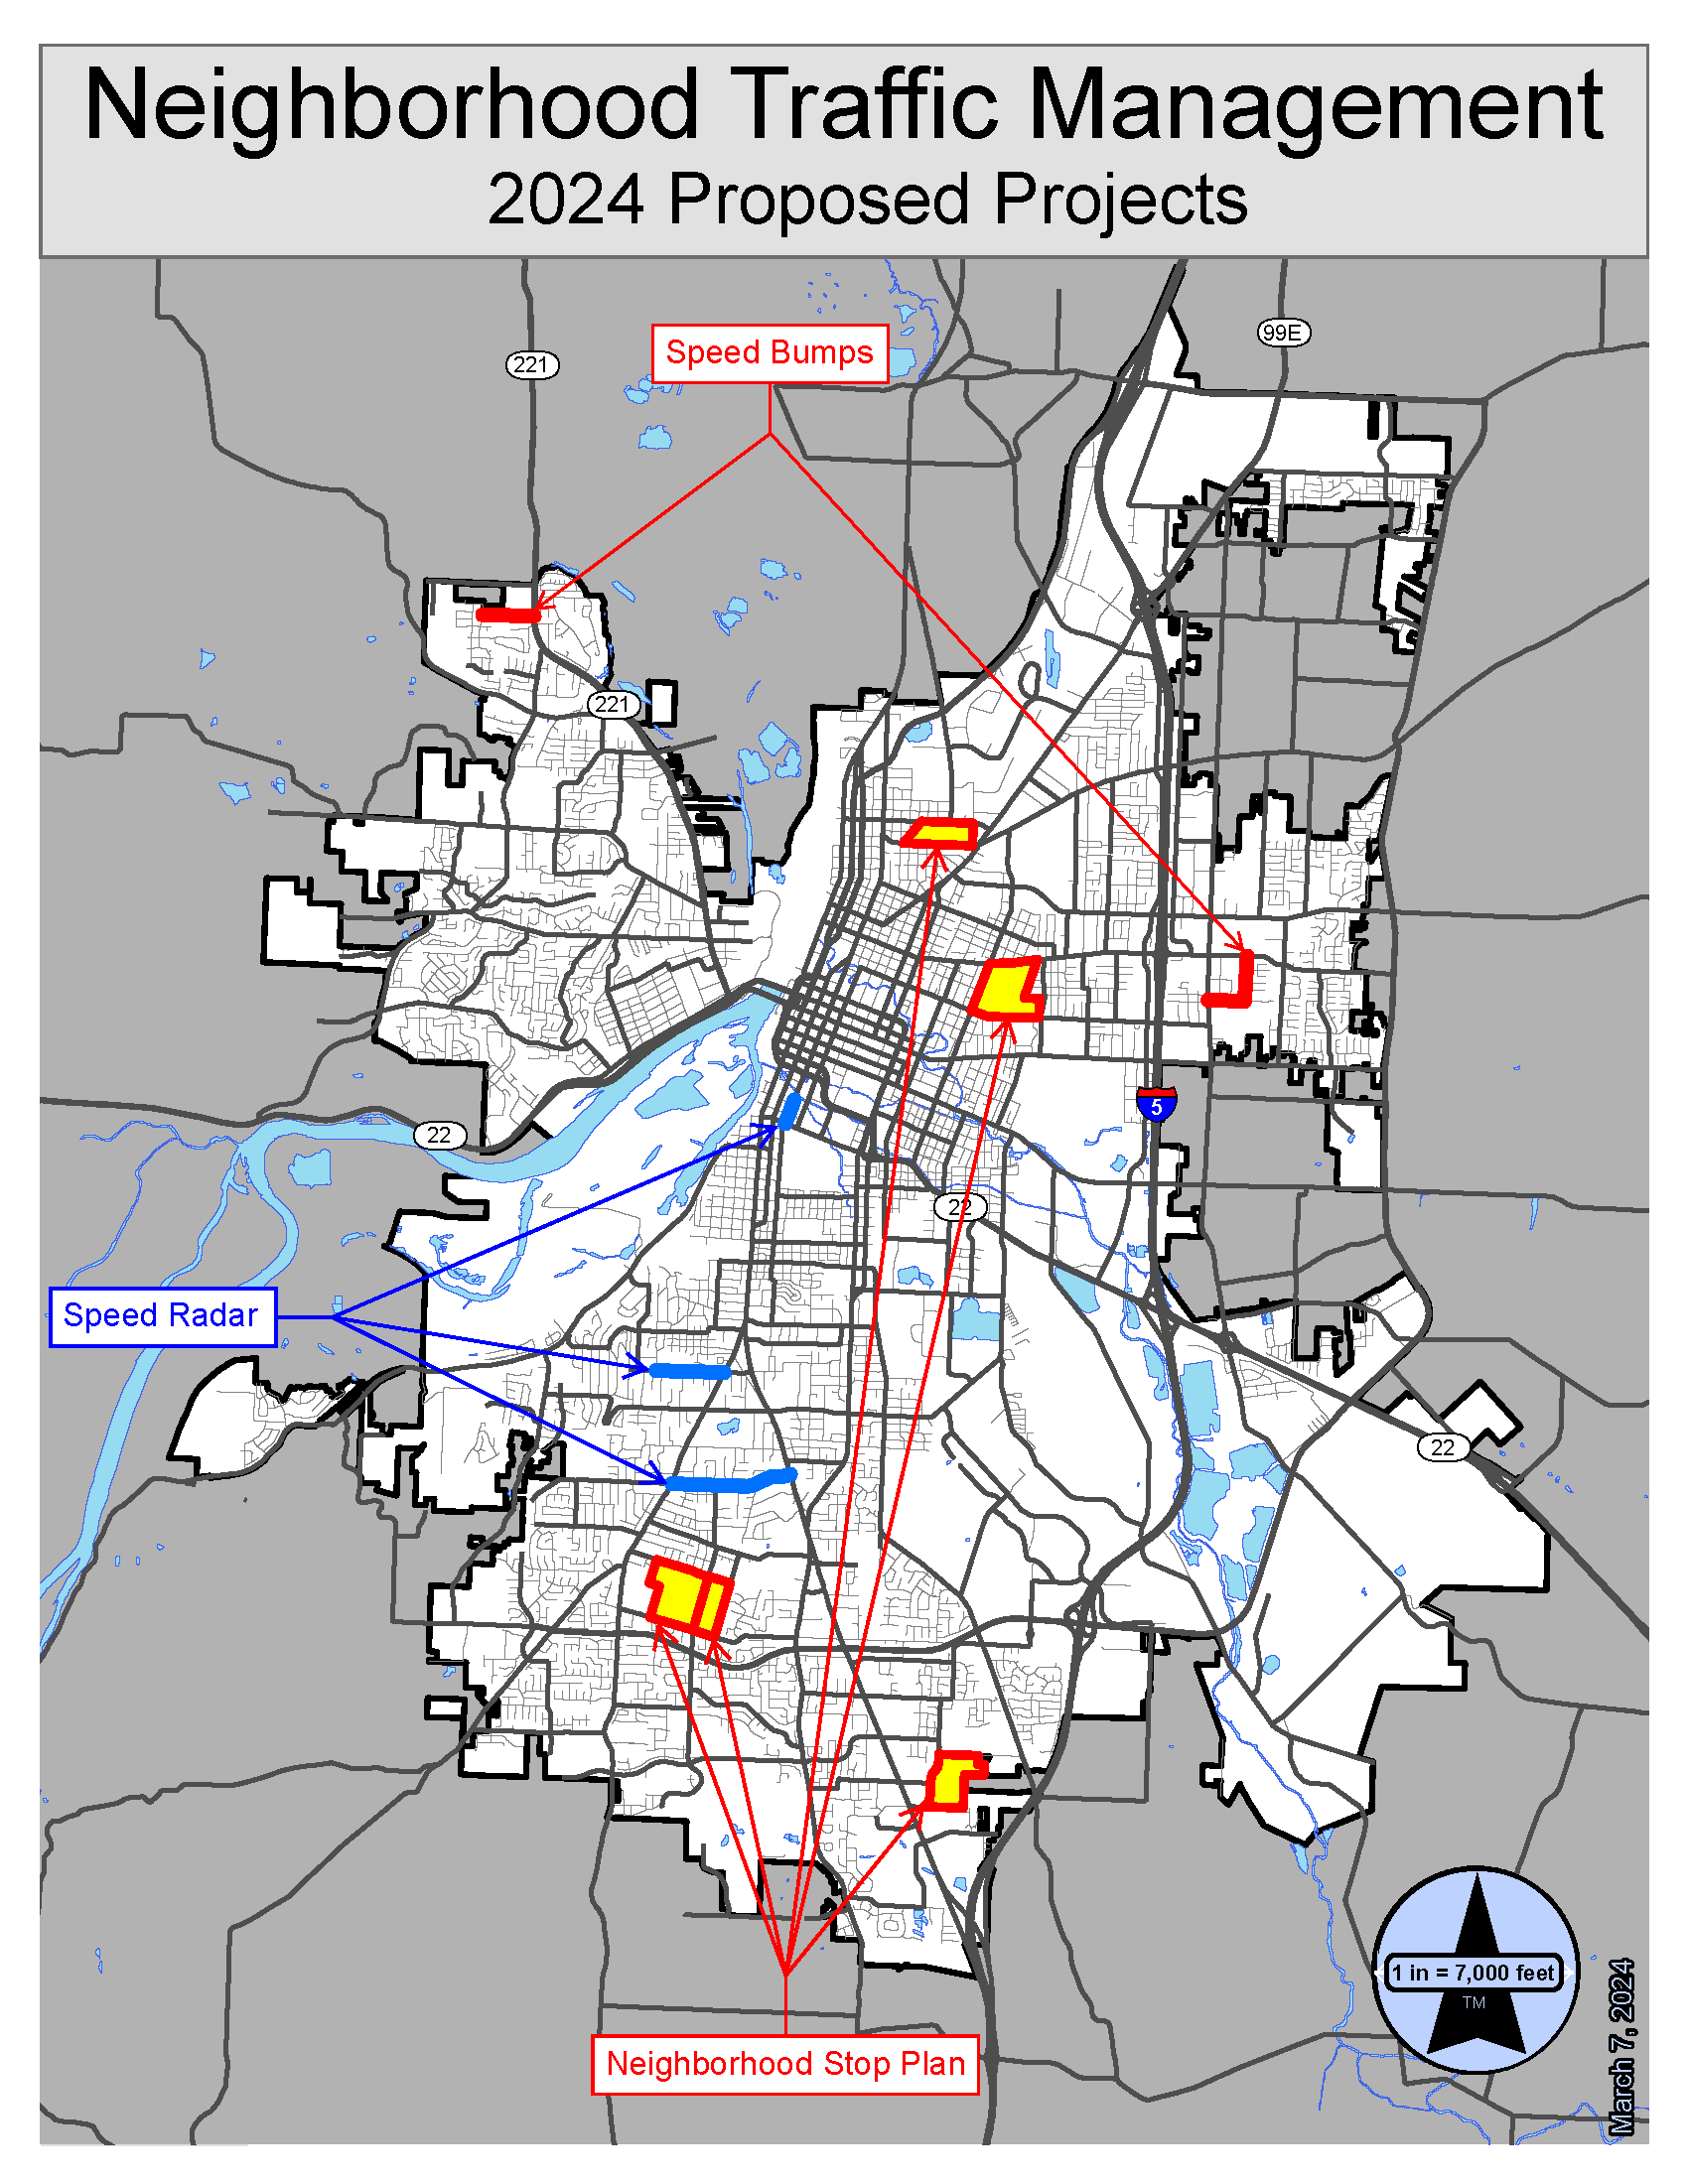 2024 Neighborhood Traffic Management Proposed Projects Map